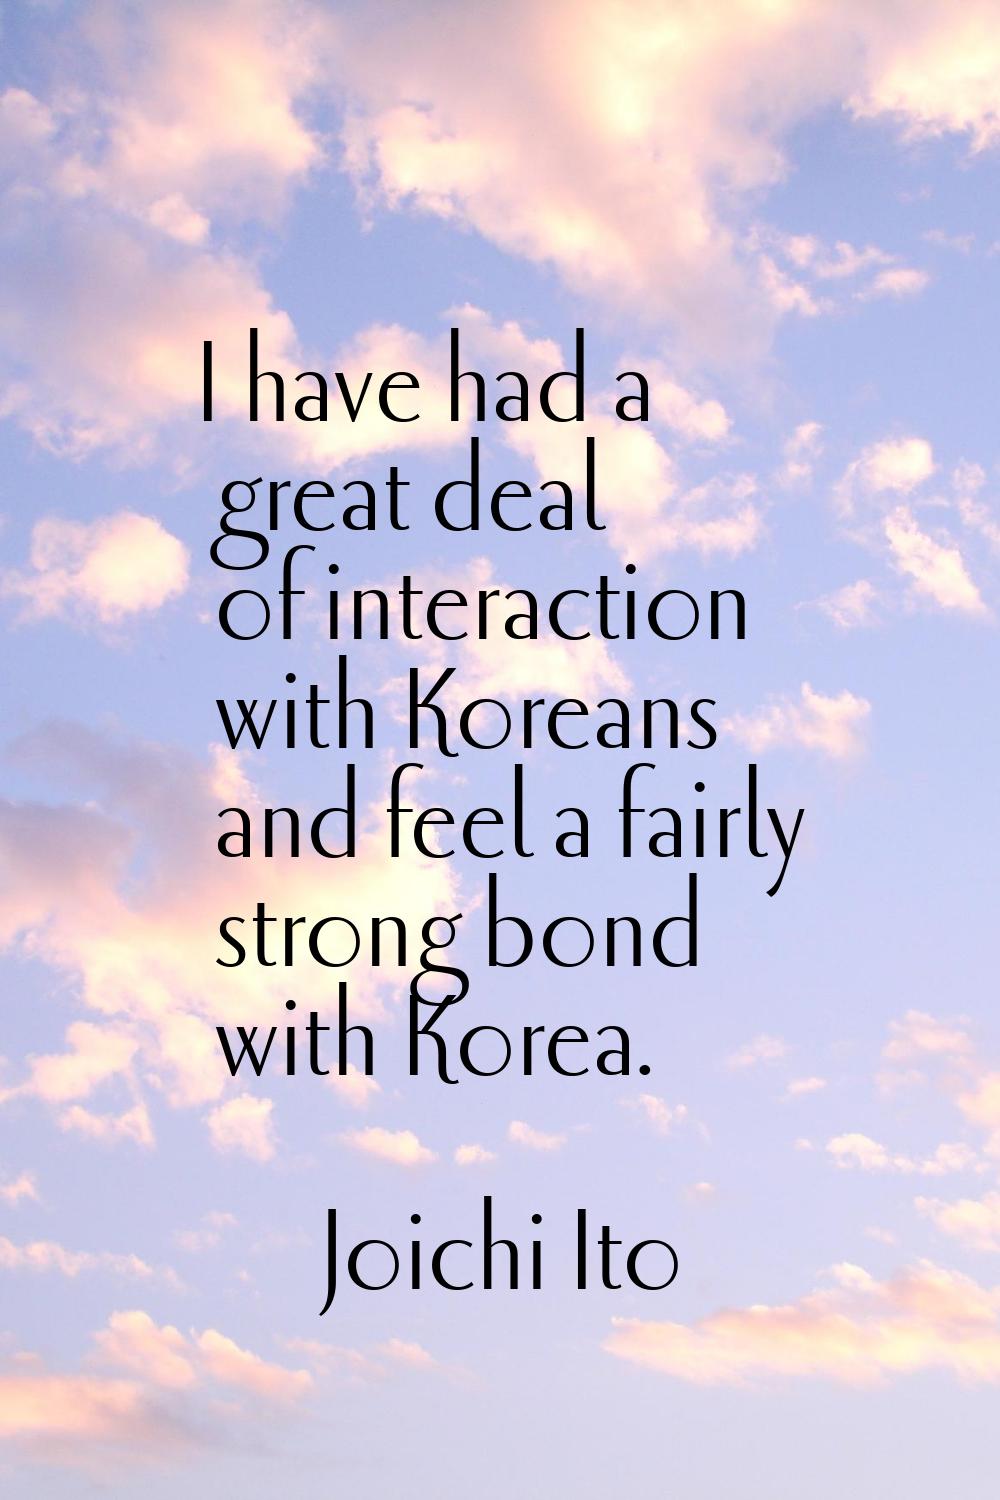 I have had a great deal of interaction with Koreans and feel a fairly strong bond with Korea.